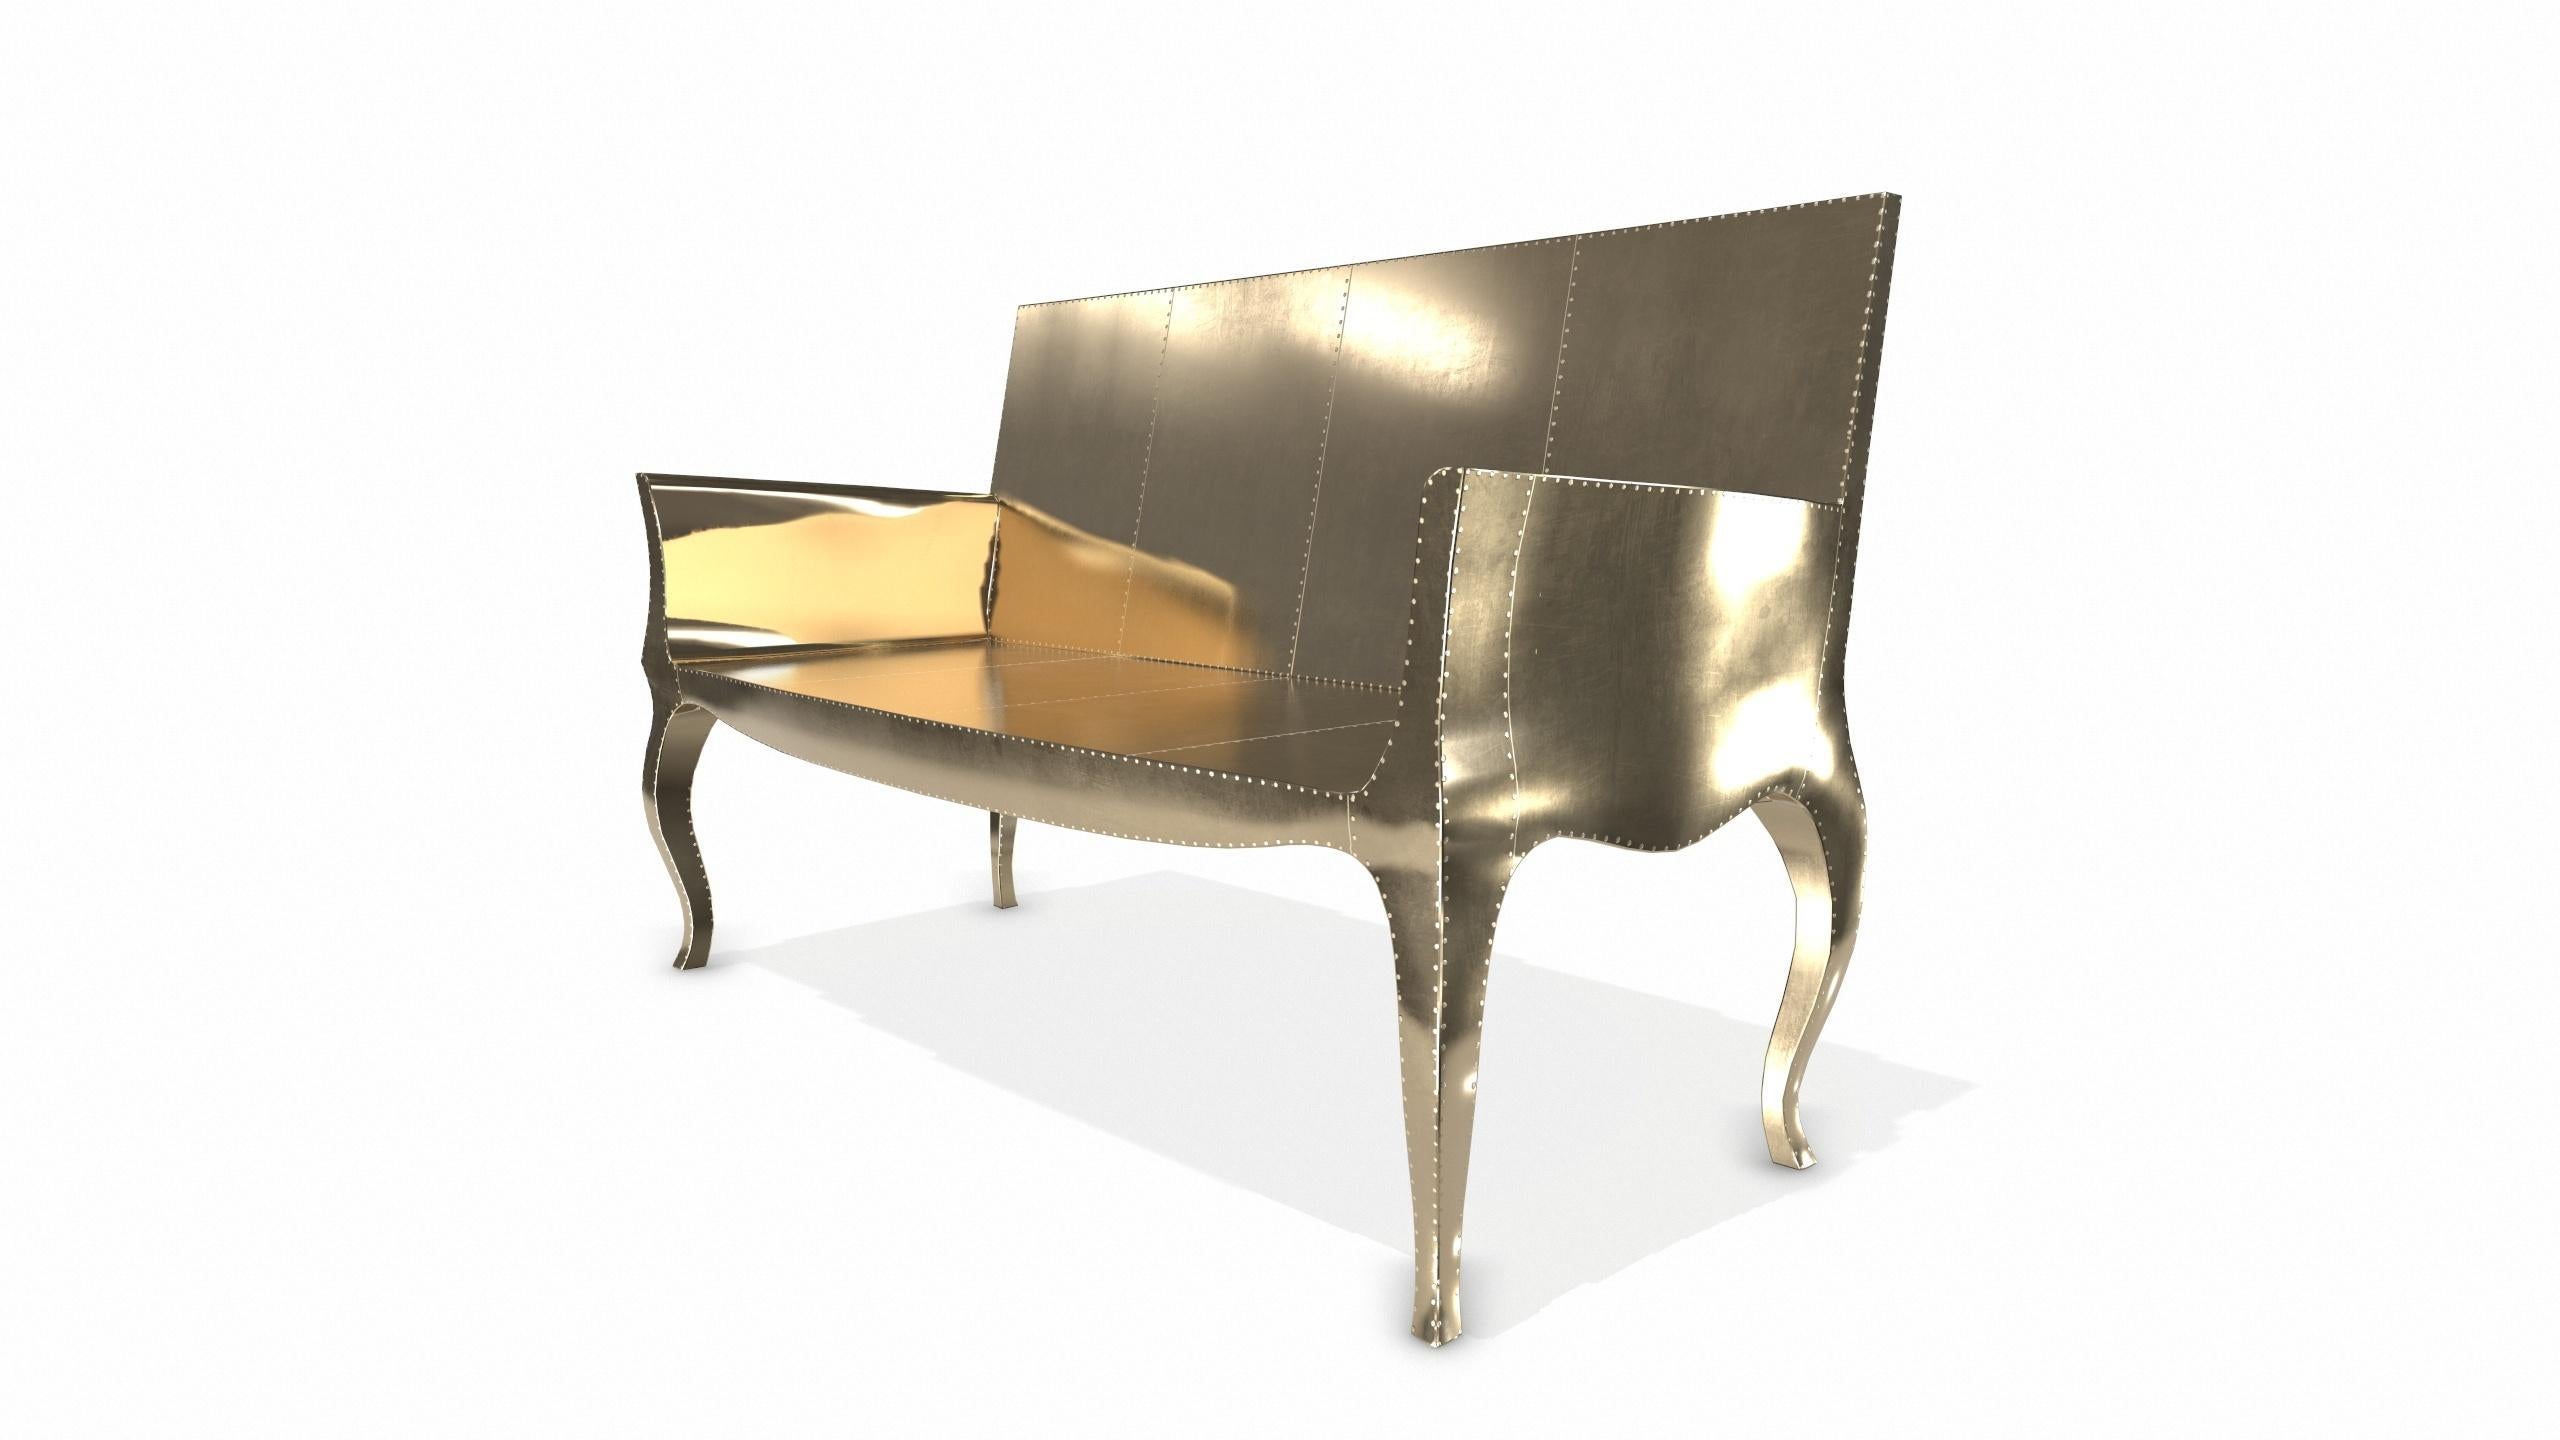 Hand-Crafted Louise Settee Art Deco Loveseats in Smooth Brass by Paul Mathieu For Sale